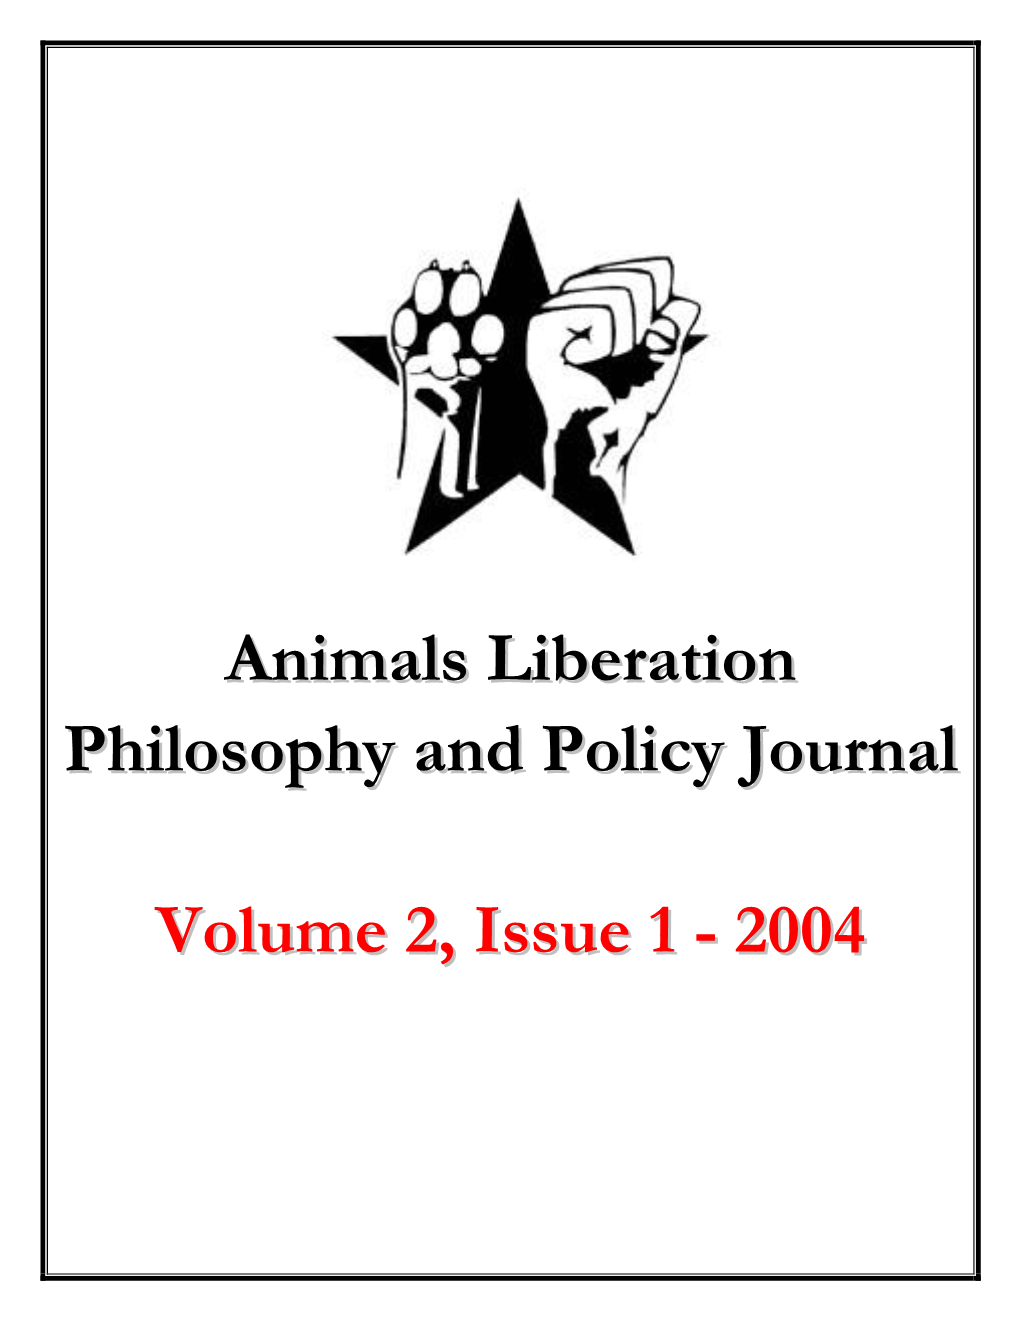 Animals Liberation Philosophy and Policy Journal Volume 2, Issue 1